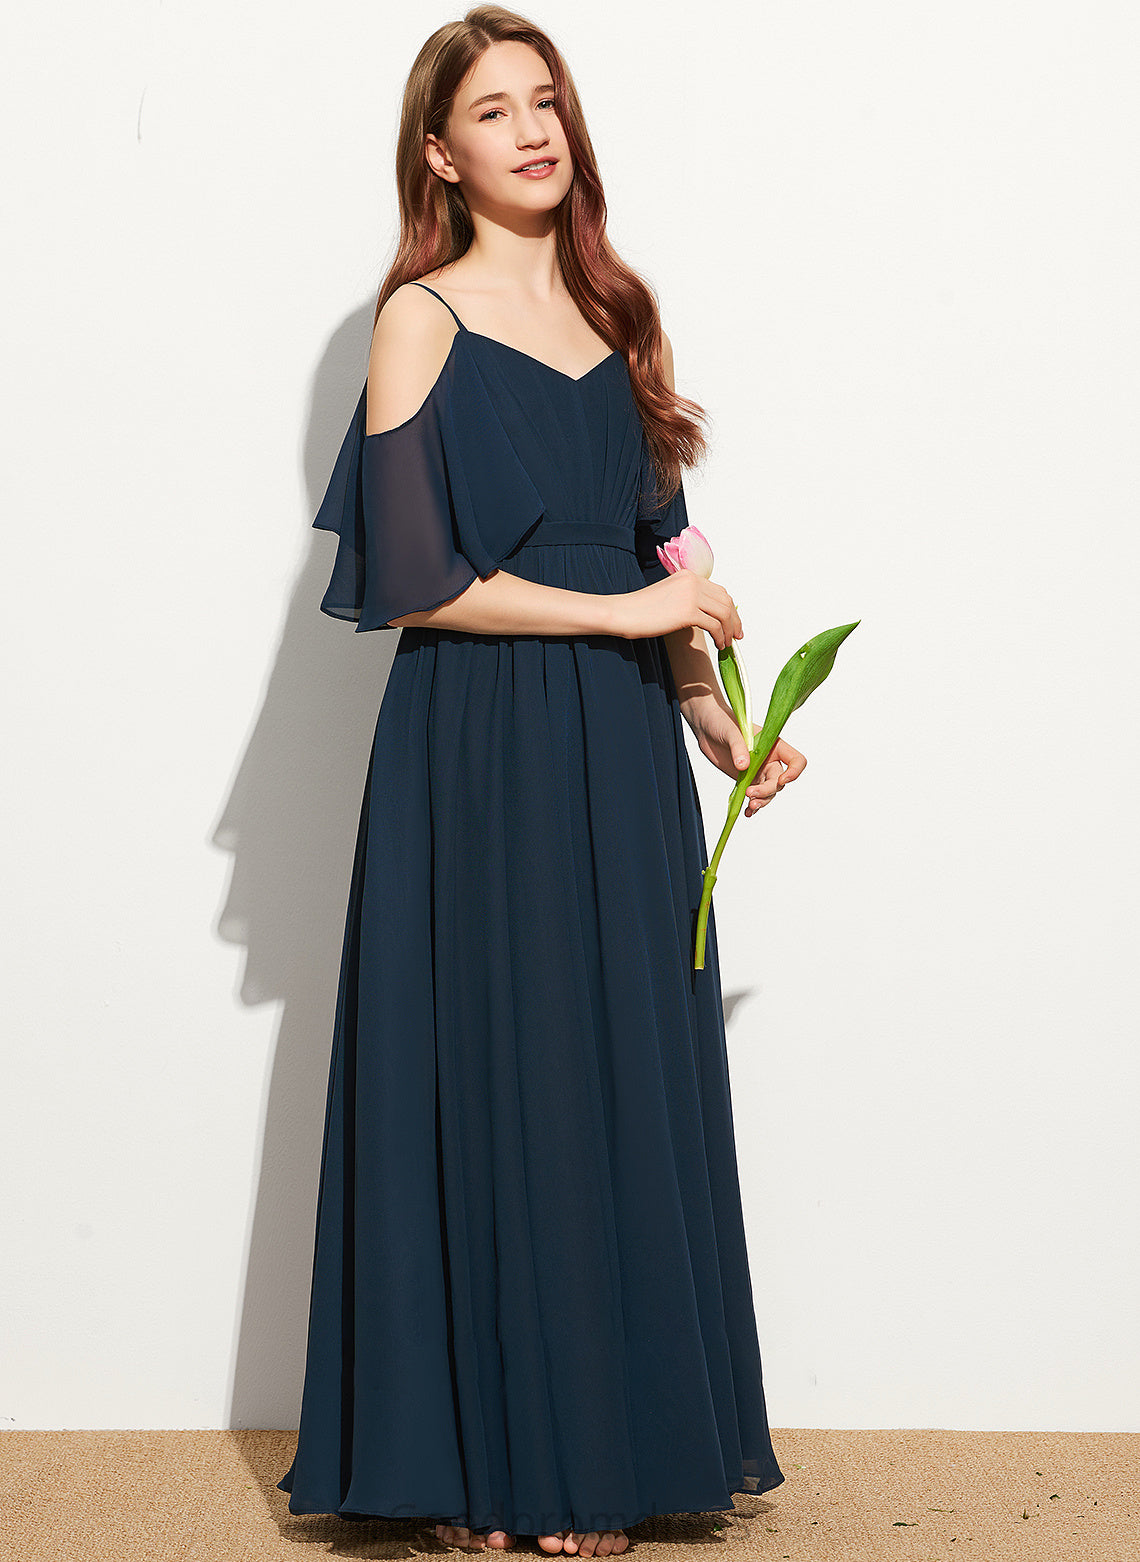 Chiffon Off-the-Shoulder Andrea A-Line Ruffle Junior Bridesmaid Dresses With Floor-Length